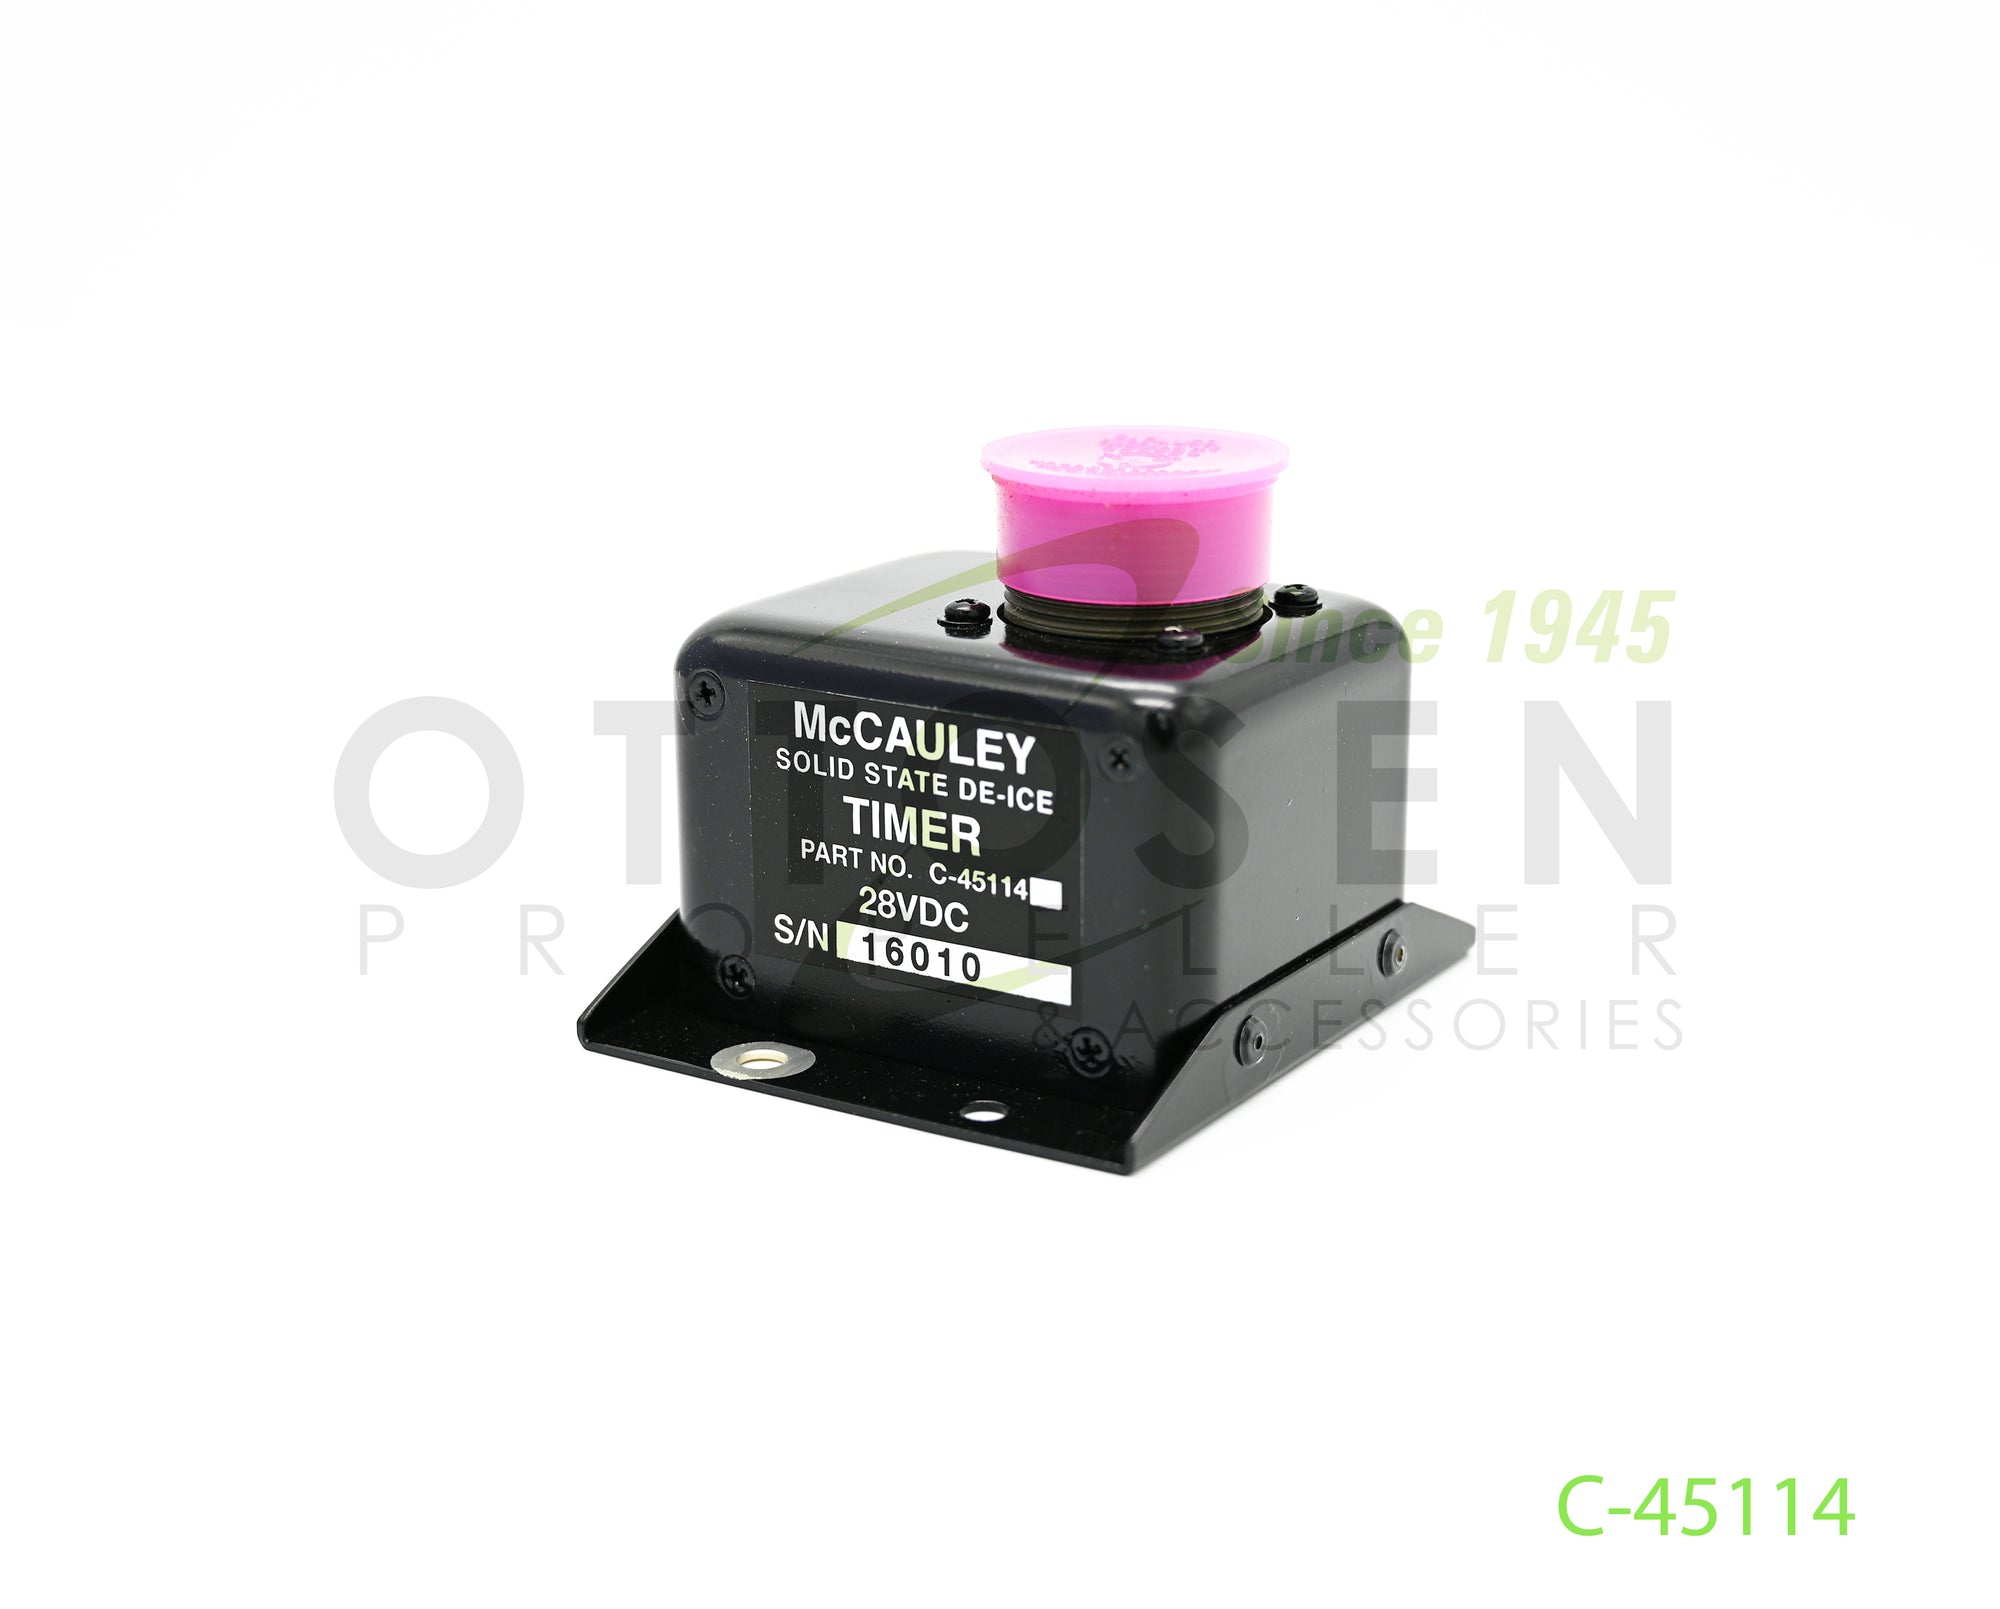 C-45114-McCAULEY-PROPELLER-SOLID-STATE-DE-ICE-TIMER-28VDC-PICTURE-1